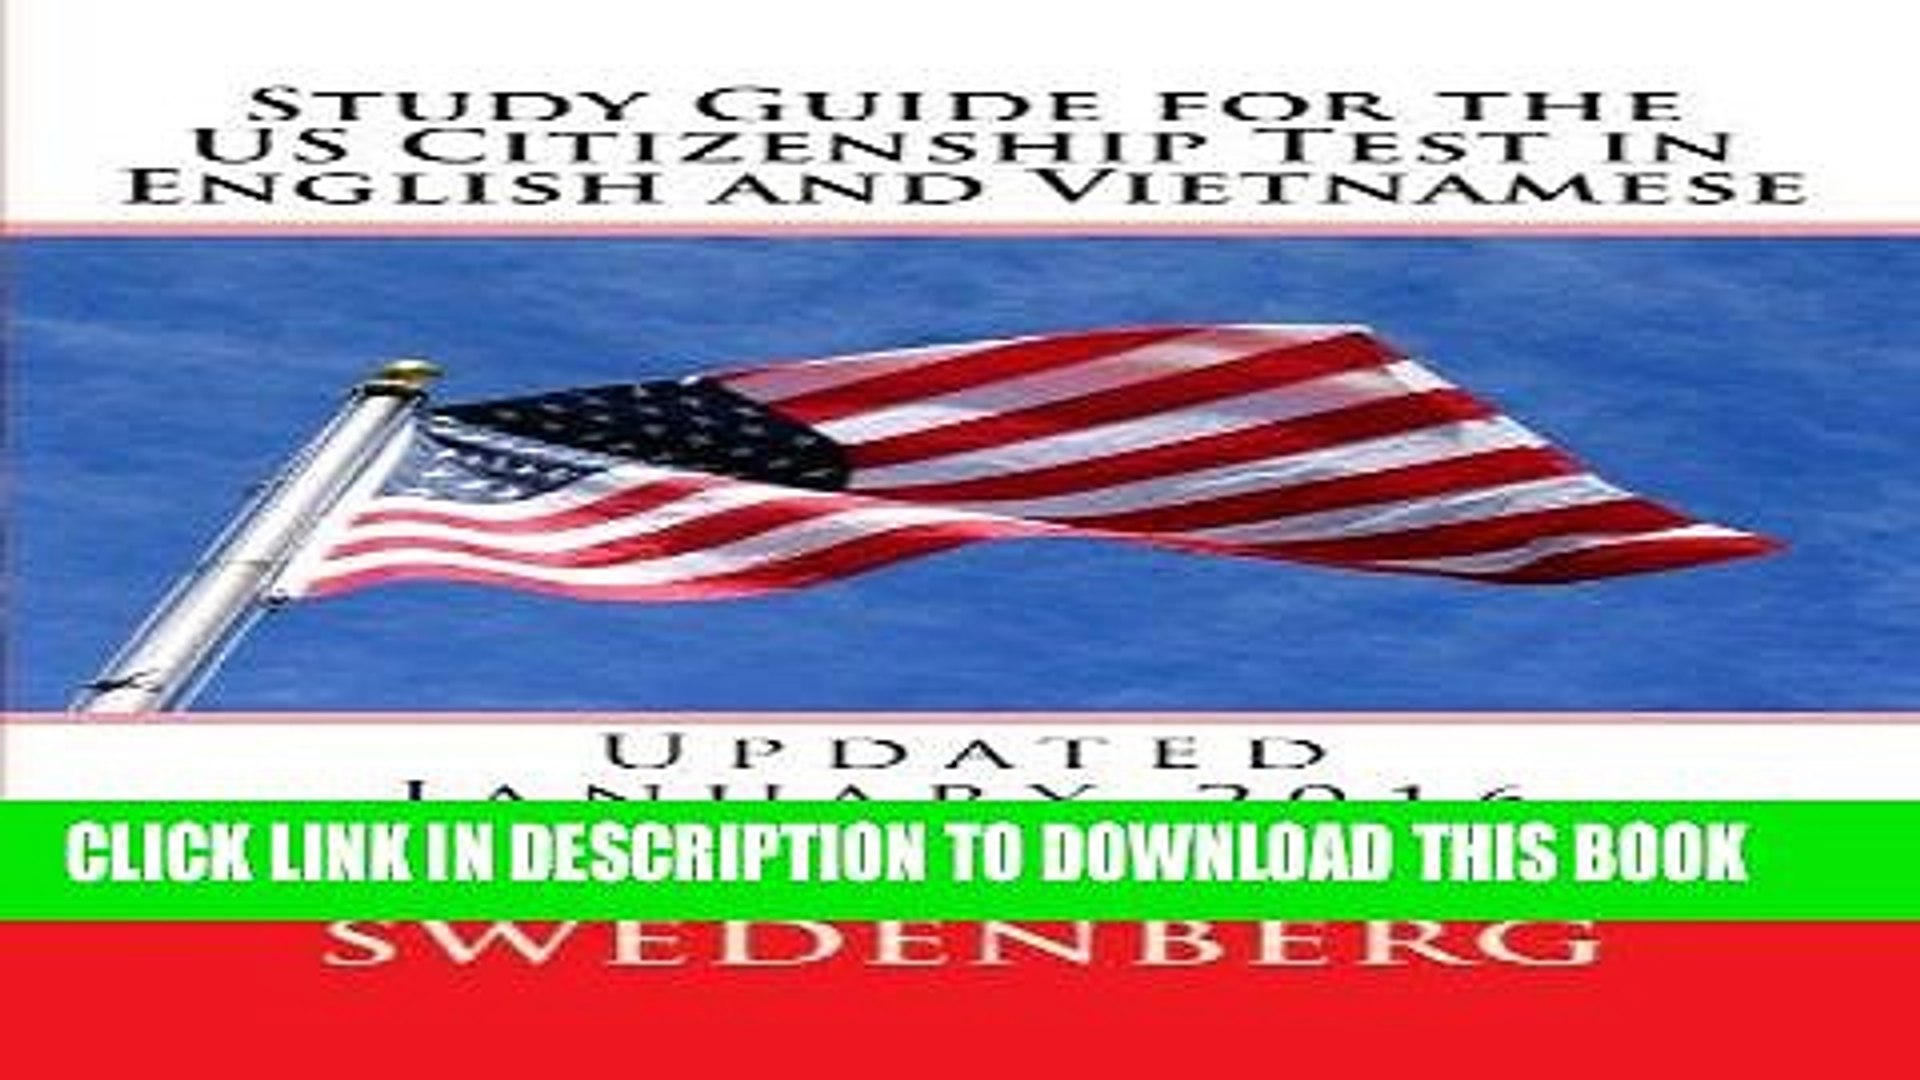 Read Now Study Guide for the US Citizenship Test in English and Vietnamese: Updated March 2016